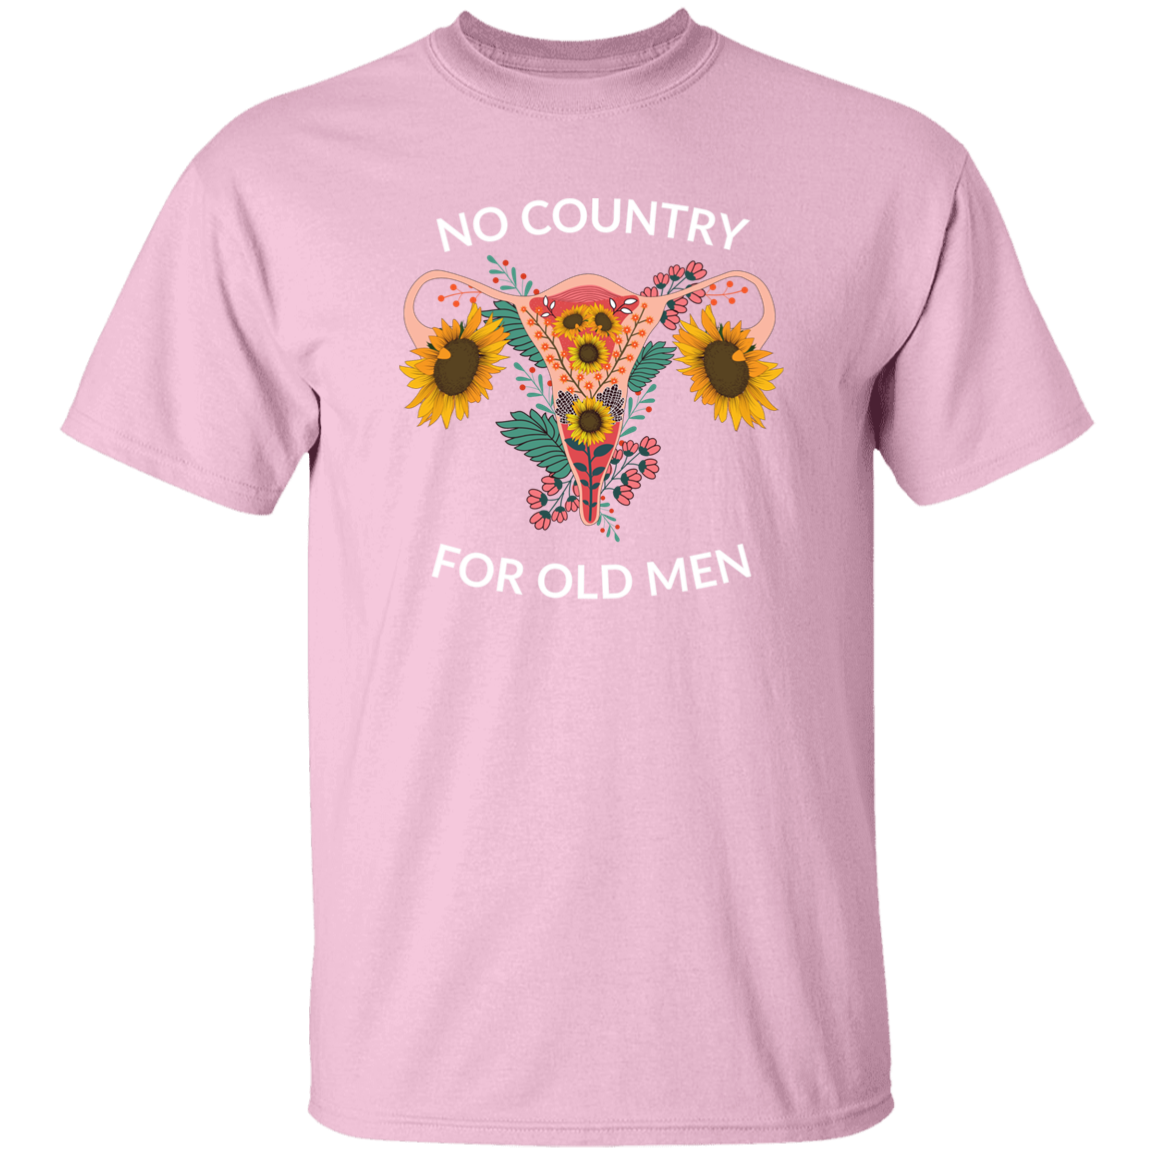 No Country For Old Men (Sunflower) Tee - Unisex